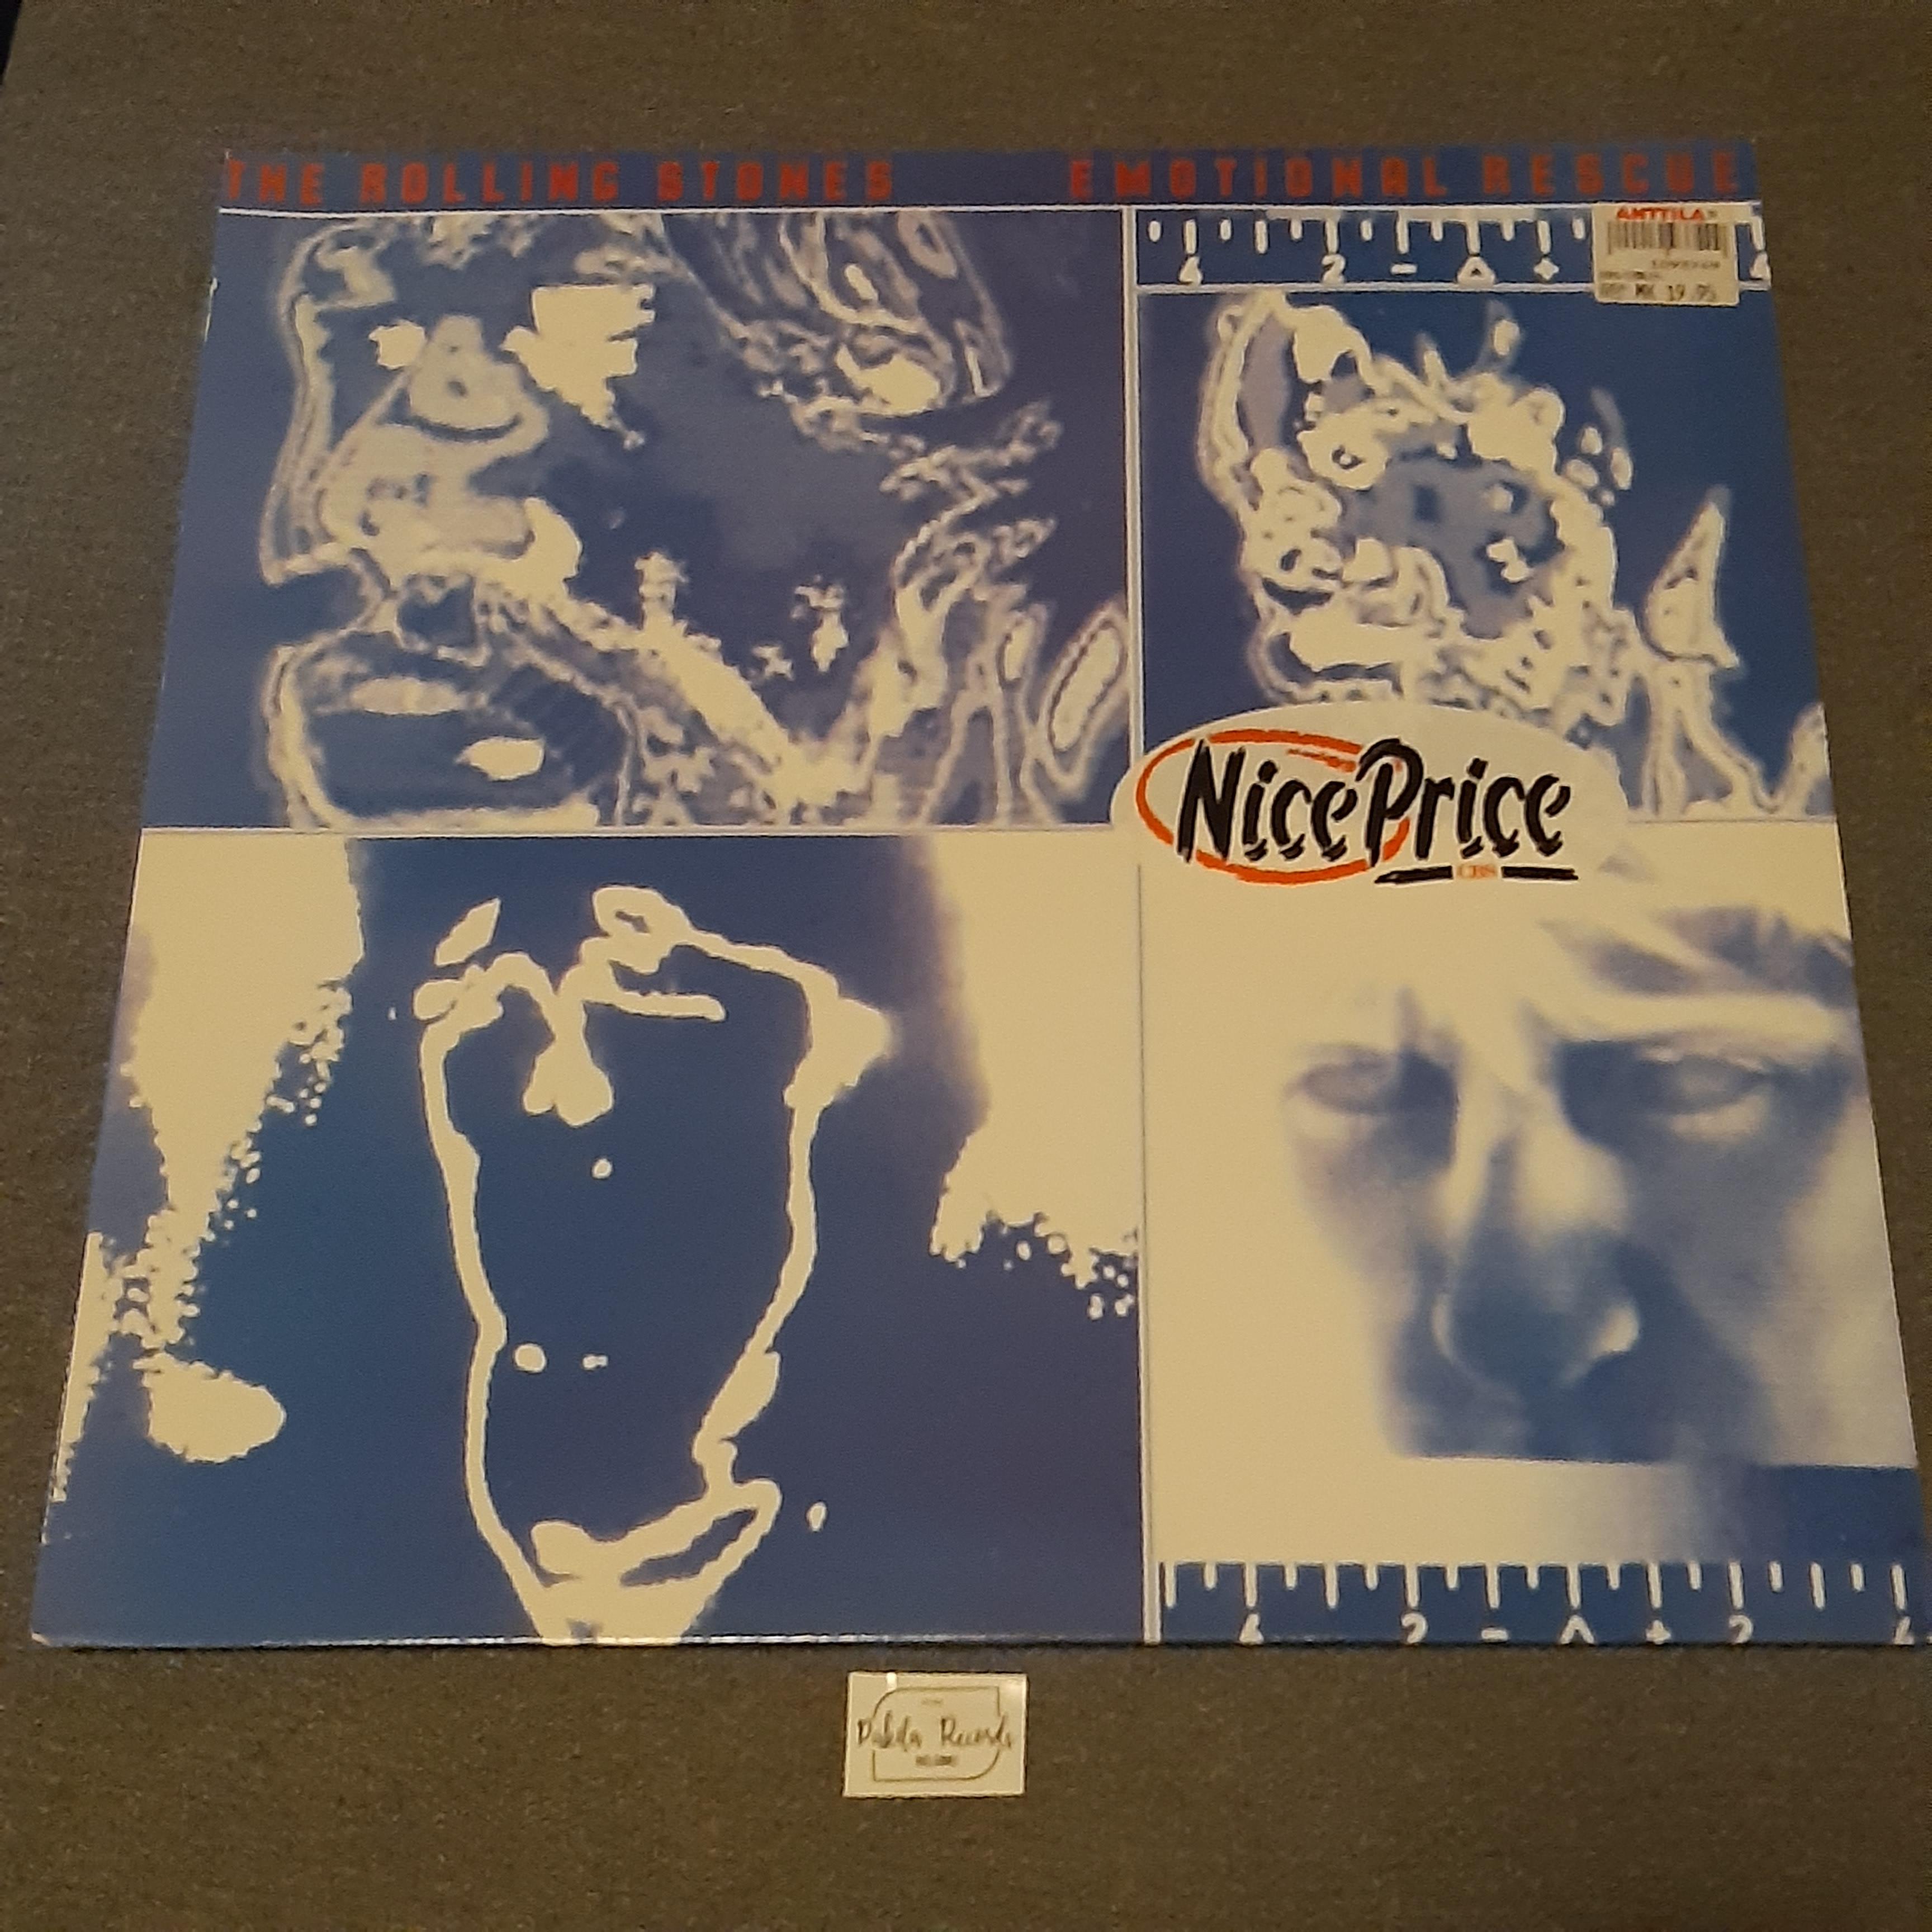 The Rolling Stones - Emotional Rescue - LP (käytetty)